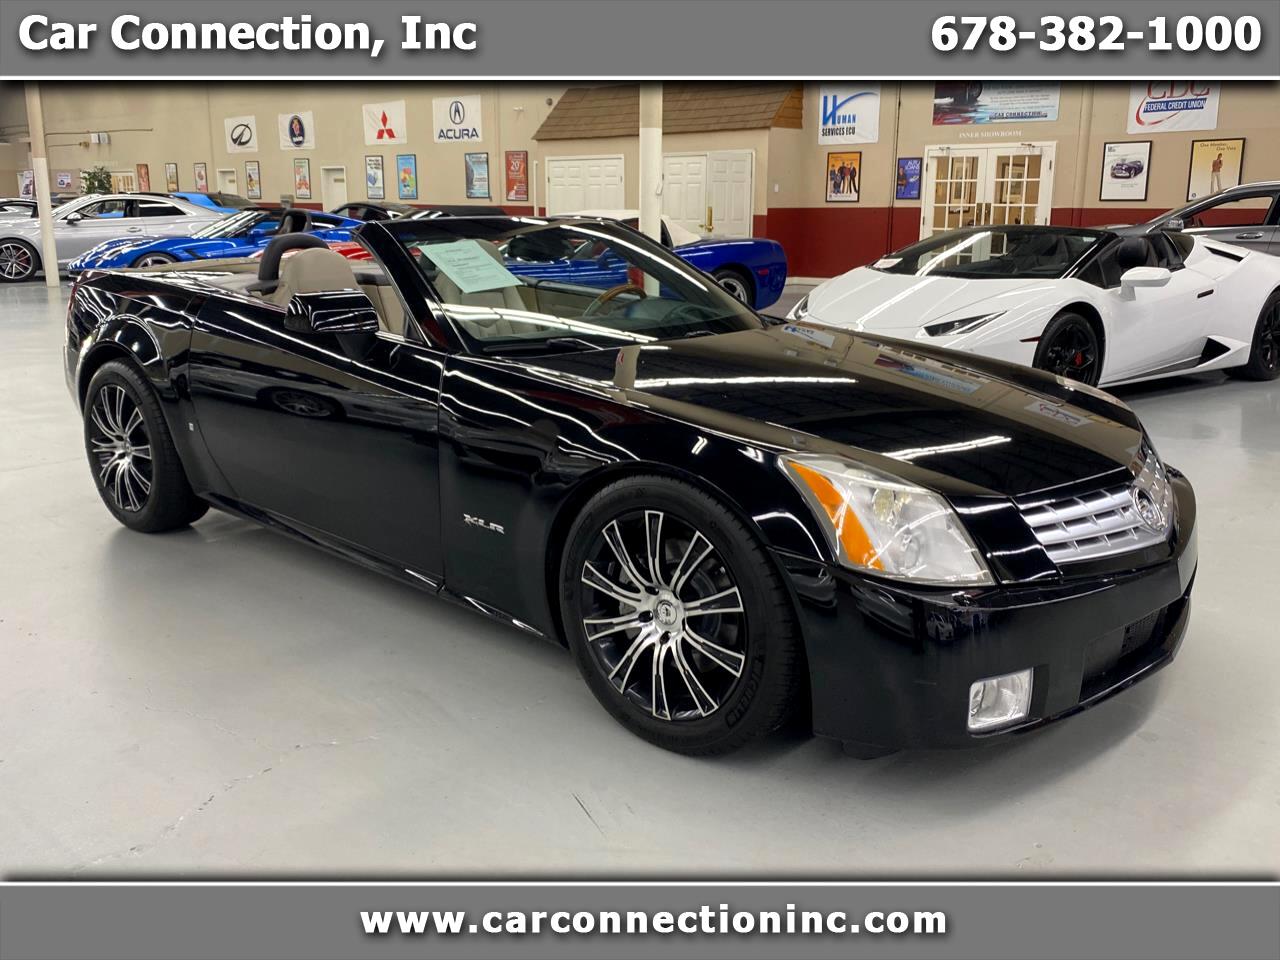 Used 2006 Cadillac XLR 2dr Convertible for Sale in Tucker GA 30084 Car  Connection, Inc